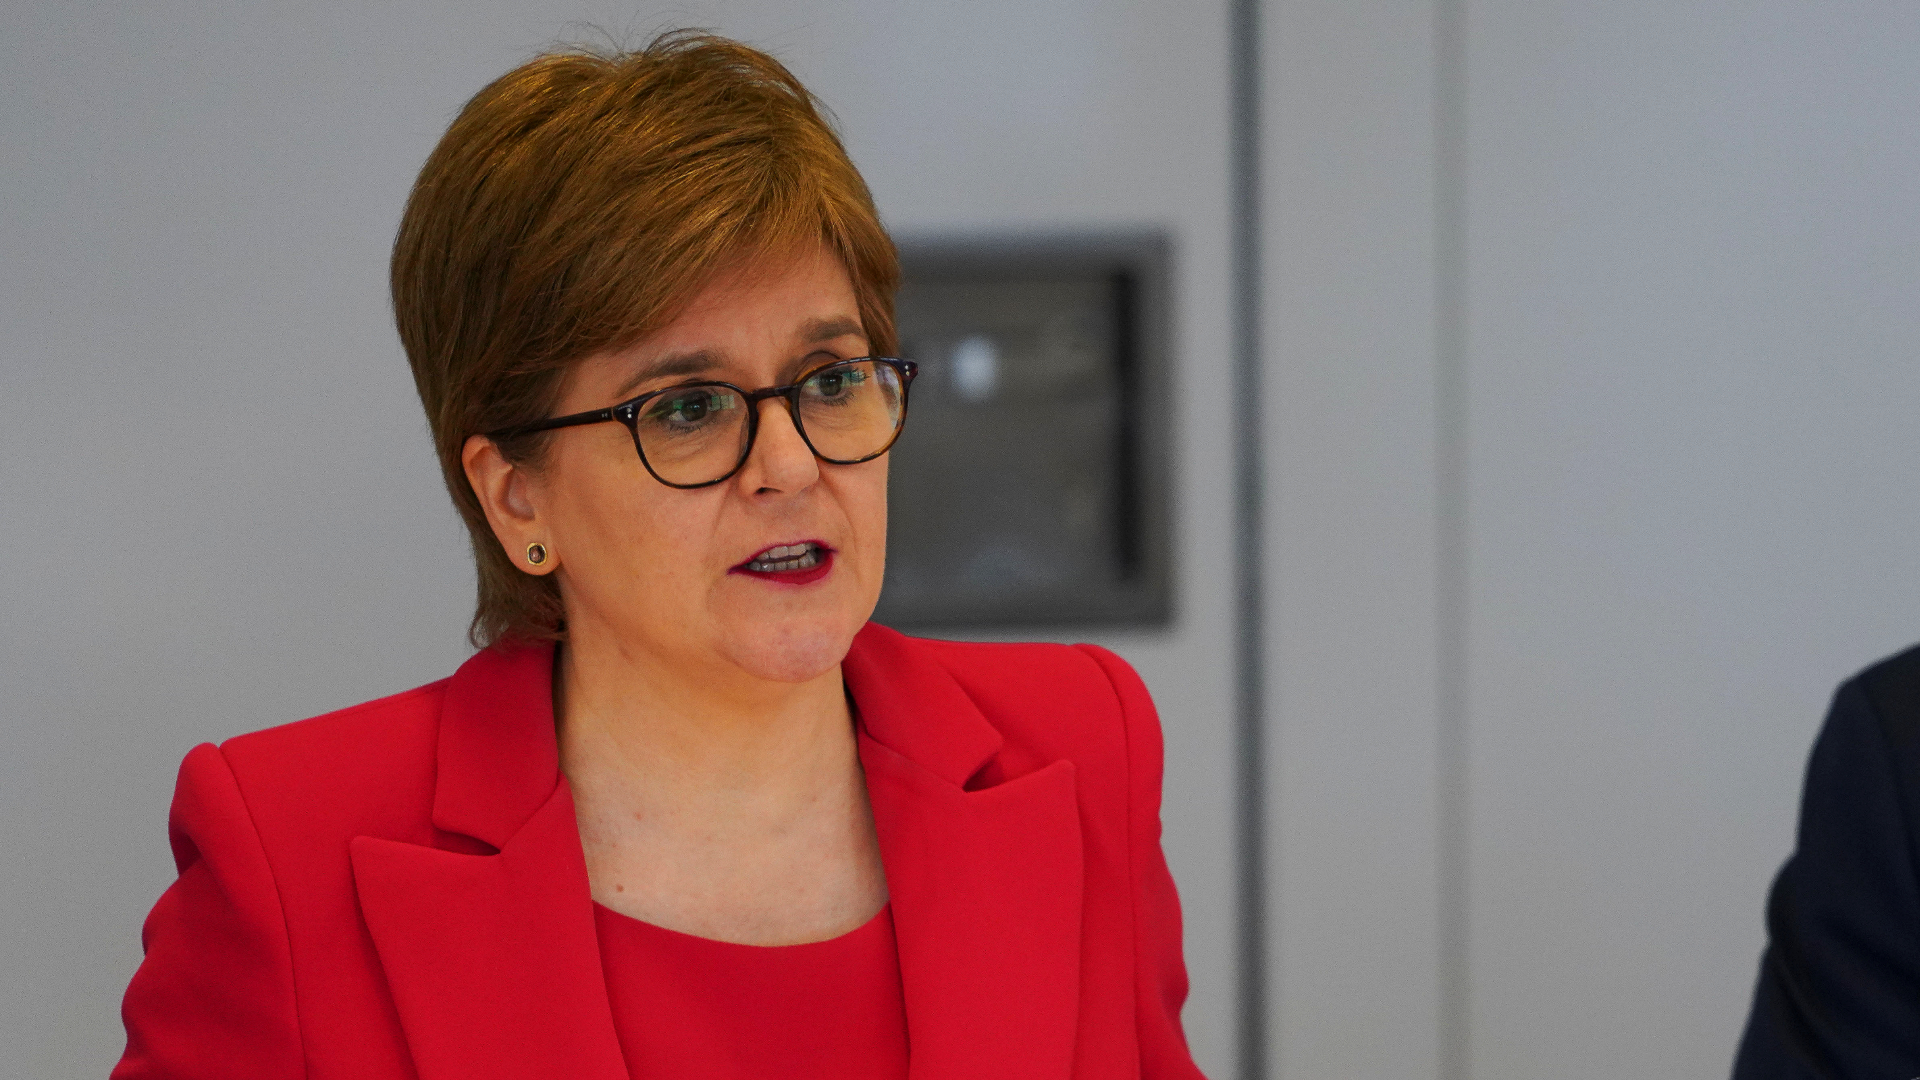 Nicola Sturgeon said the issue of rape and sexual assault convictions should go 'beyond party lines'.